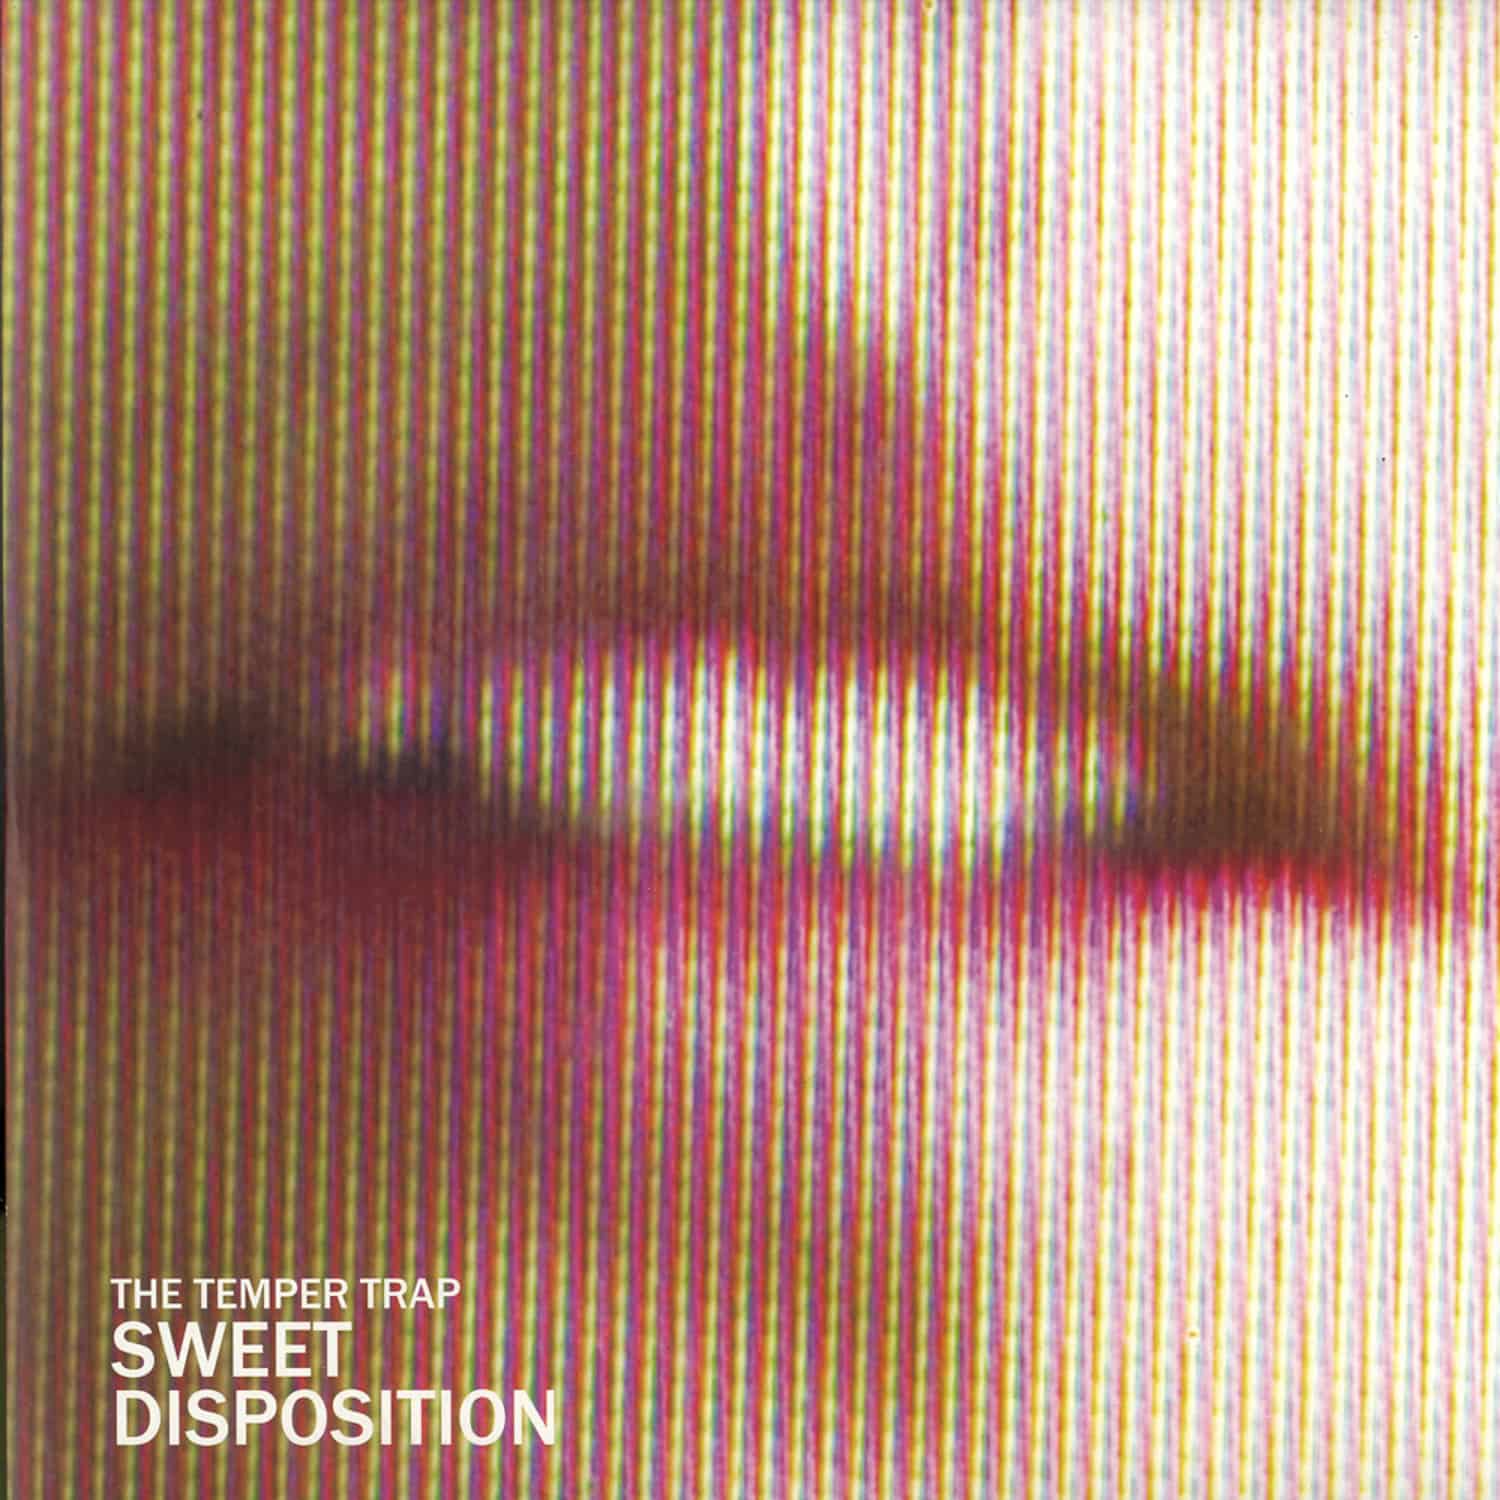 The Temper Trap - SWEET DISPOSITION